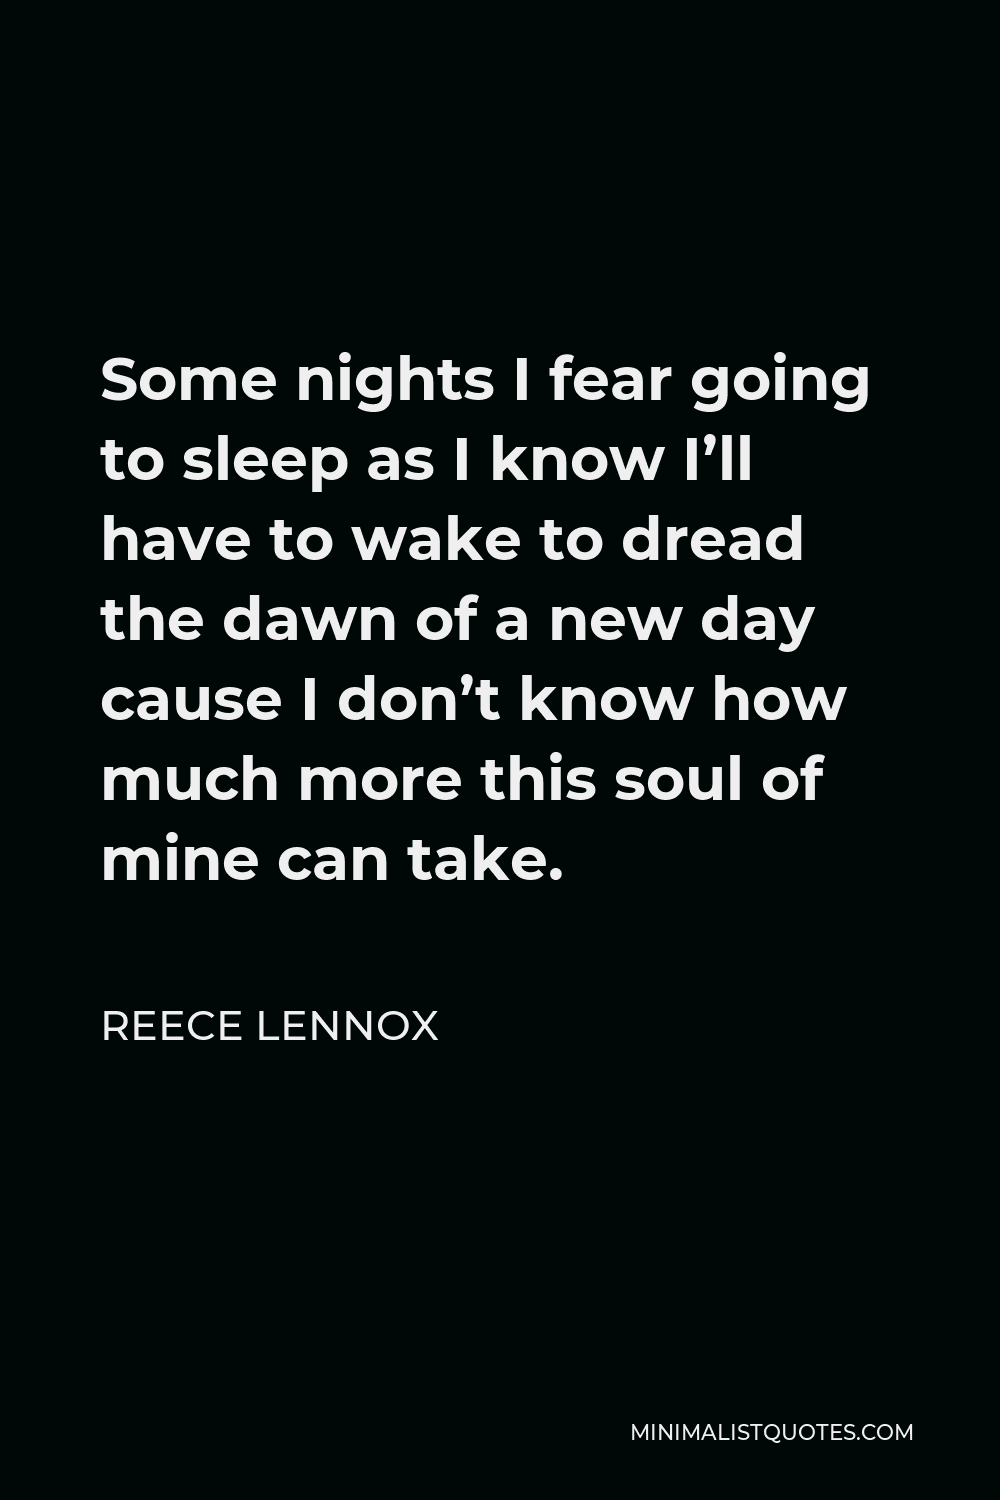 Reece Lennox Quote - Some nights I fear going to sleep as I know I’ll have to wake to dread the dawn of a new day cause I don’t know how much more this soul of mine can take.